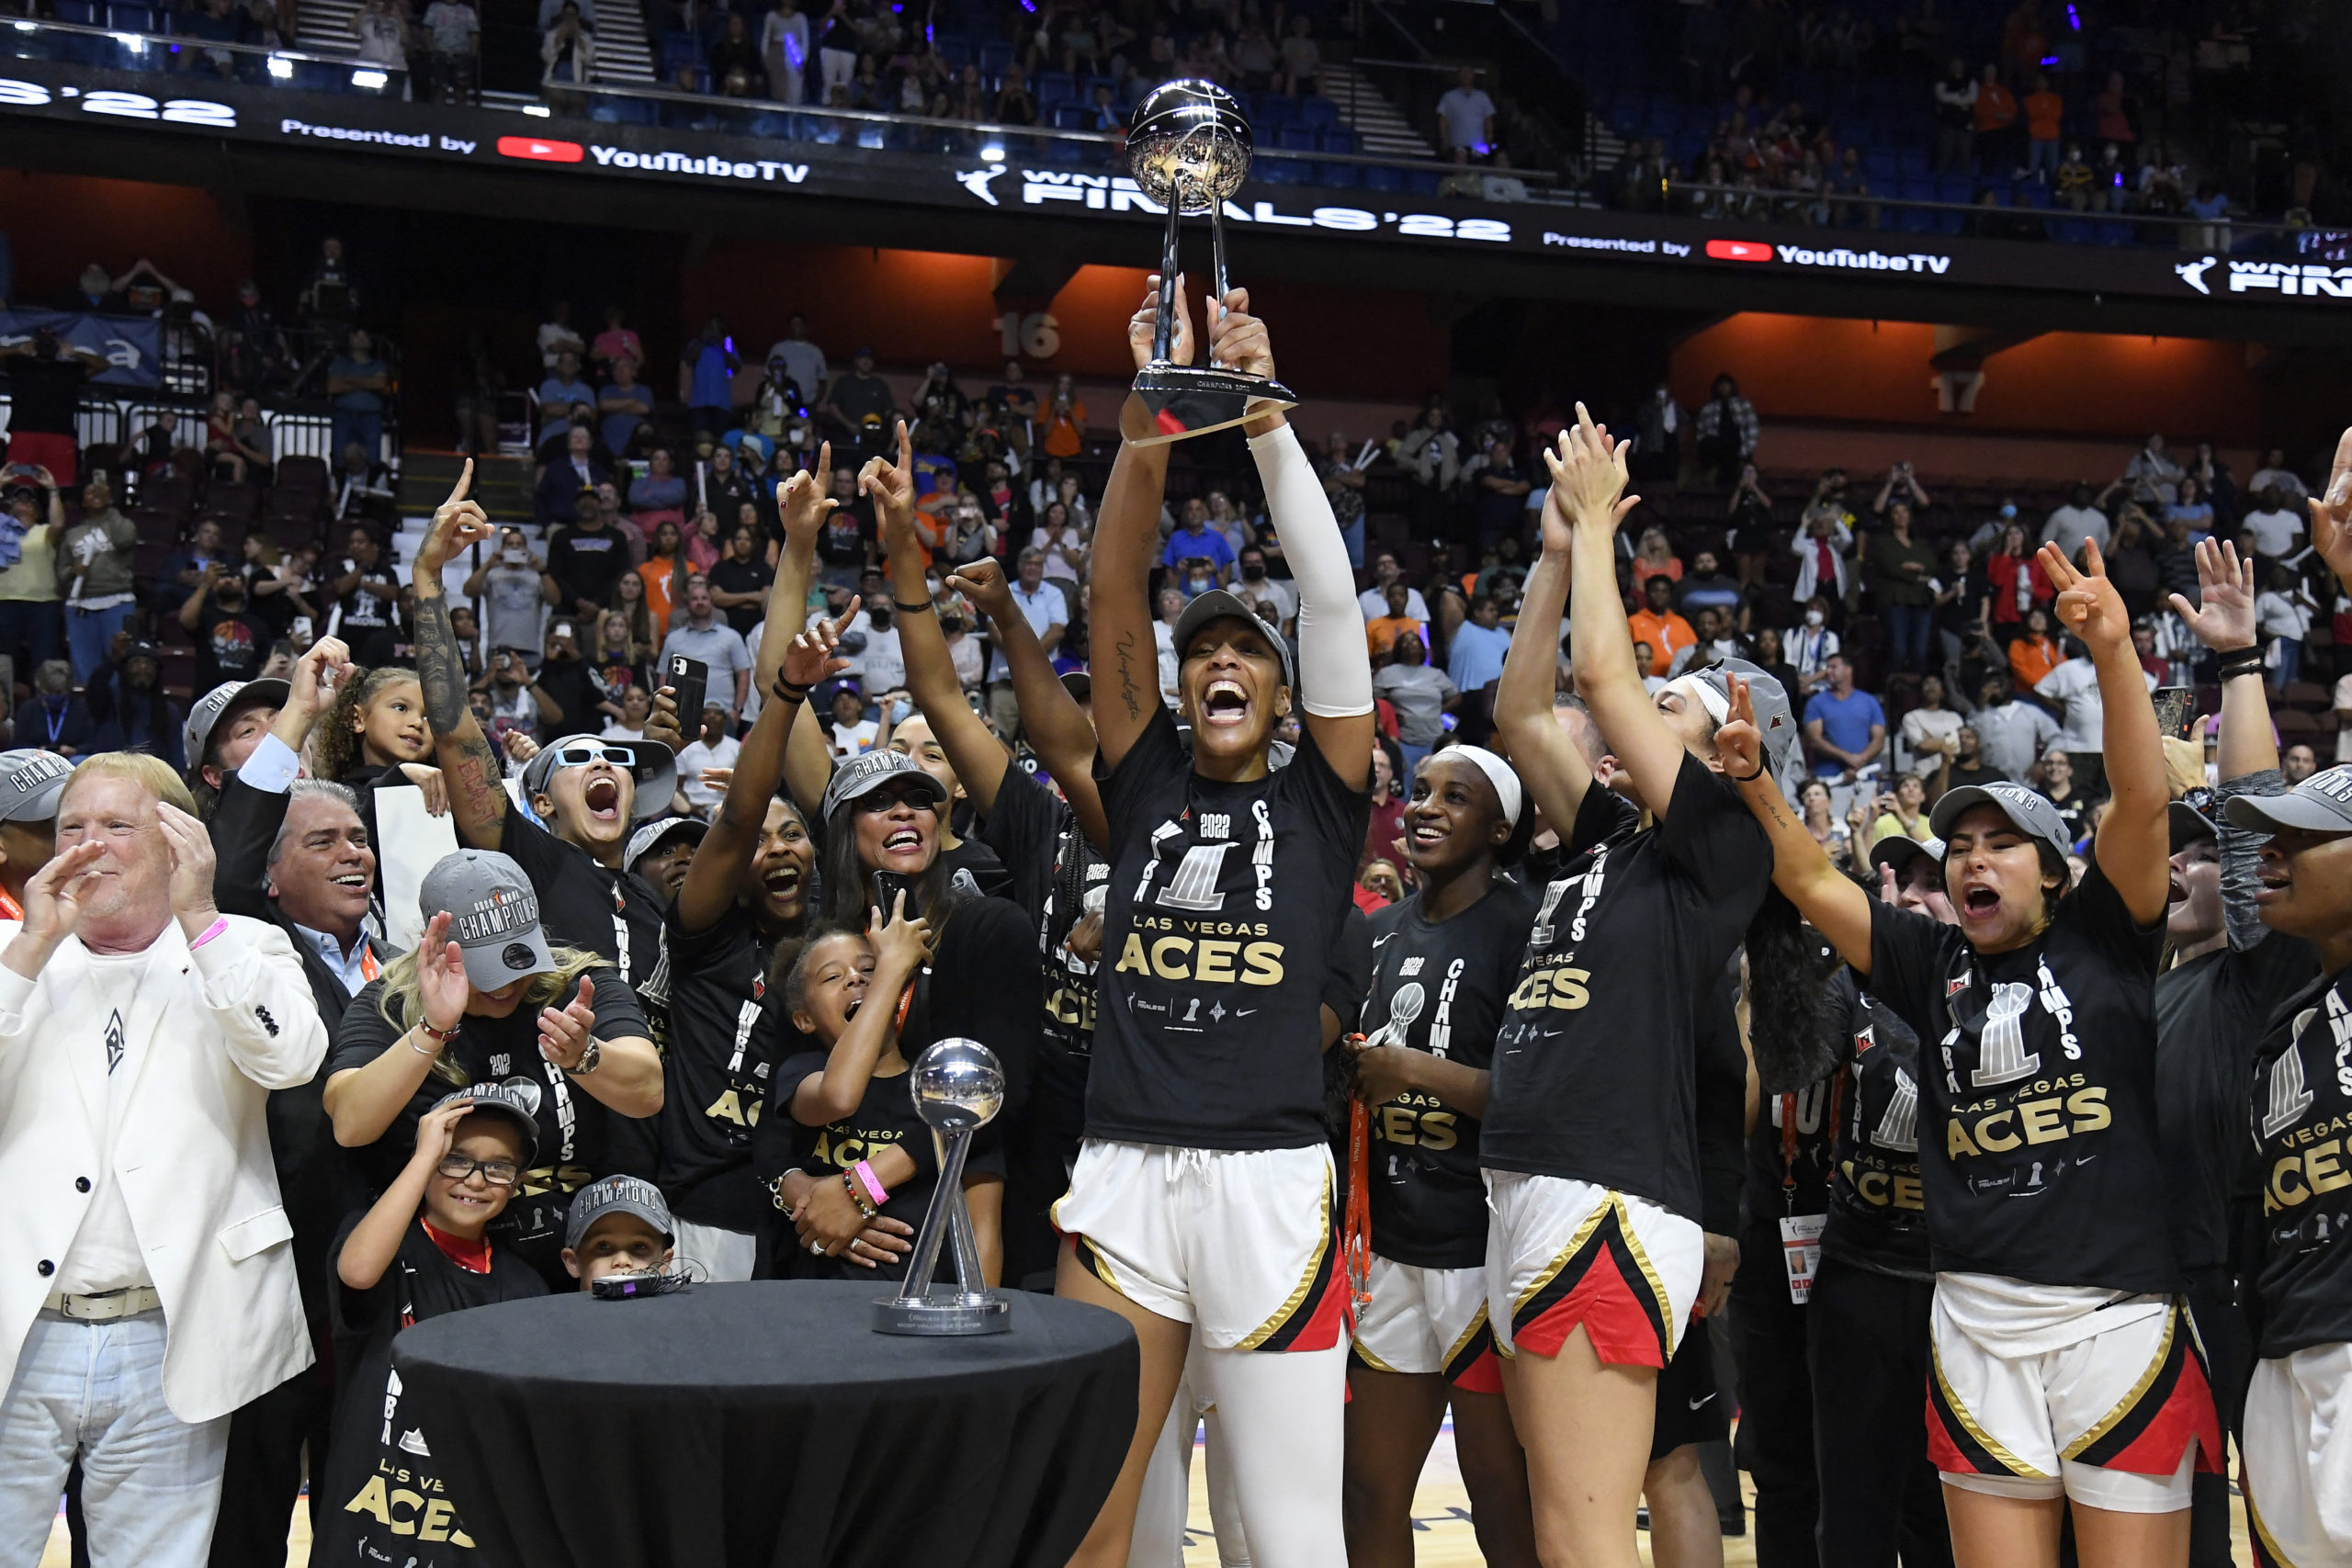 First Pro Team To Bring A Championship To Las Vegas Aces T Shirt